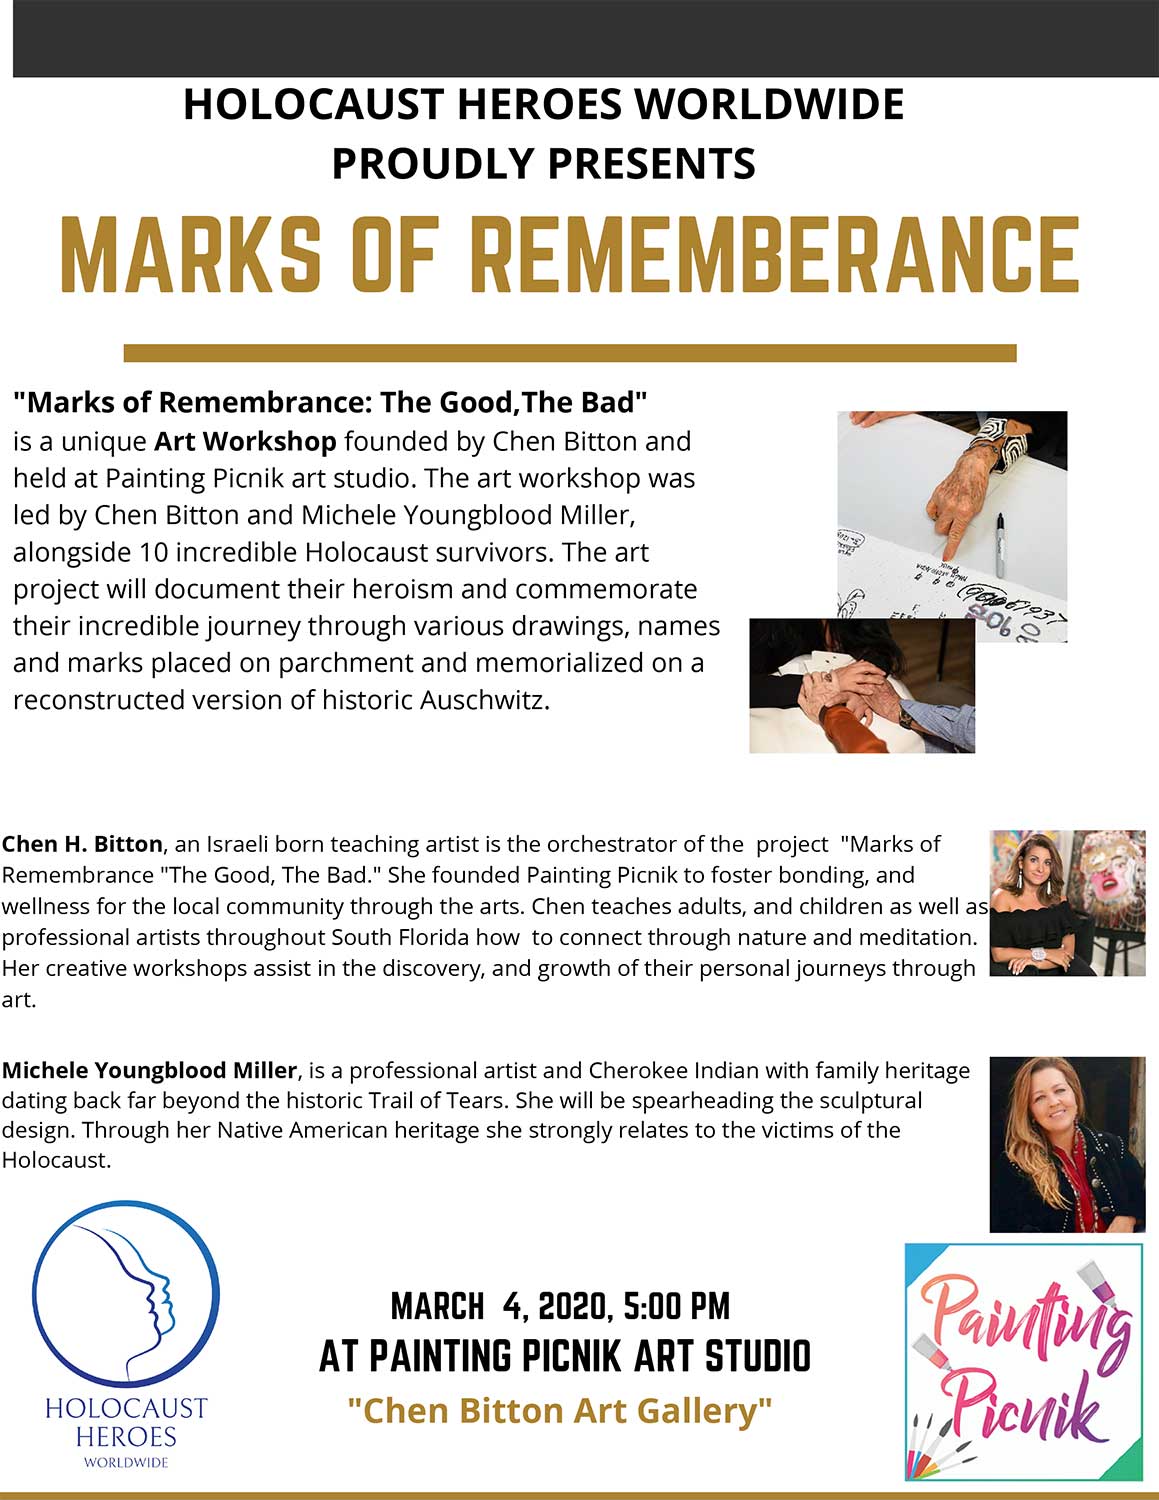 marks-of-remembrance2